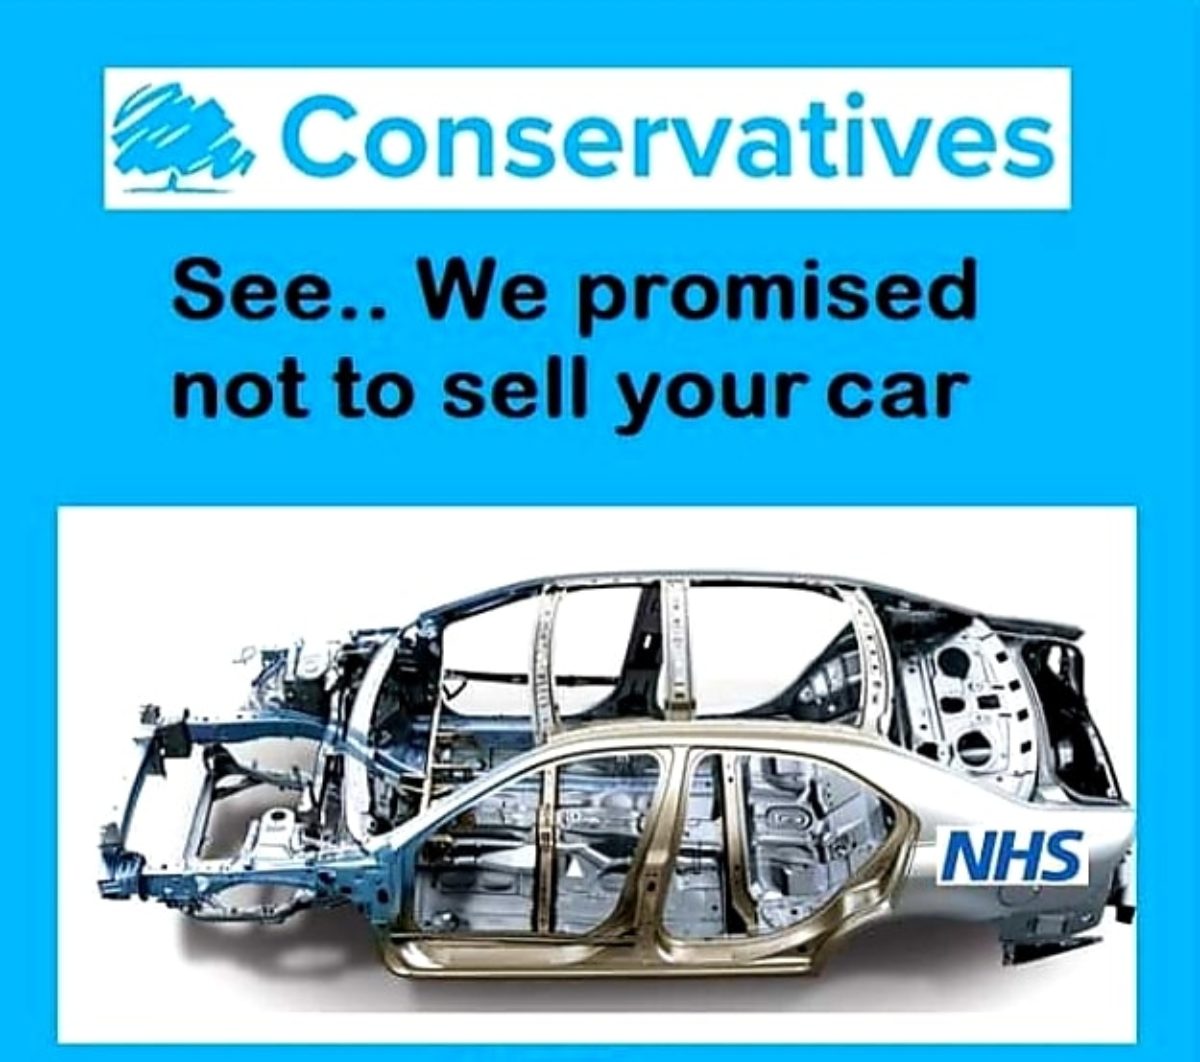 Tory promise to not sell our car